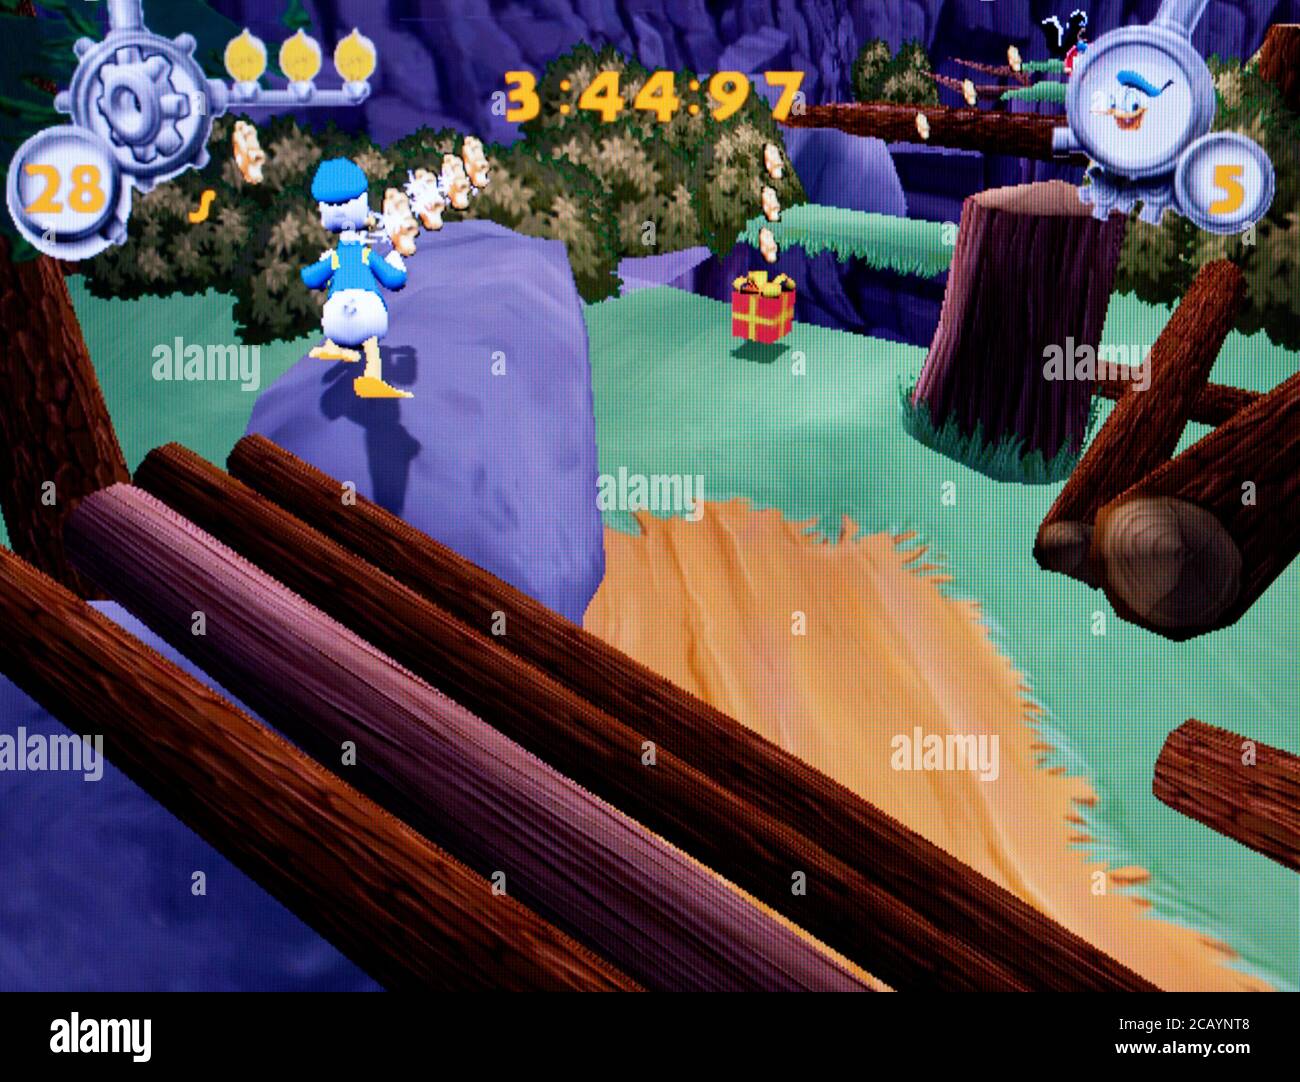 Disney's Donald Duck Goin' Quackers - Nintendo Gamecube Videogame - Editorial use only Stock Photo